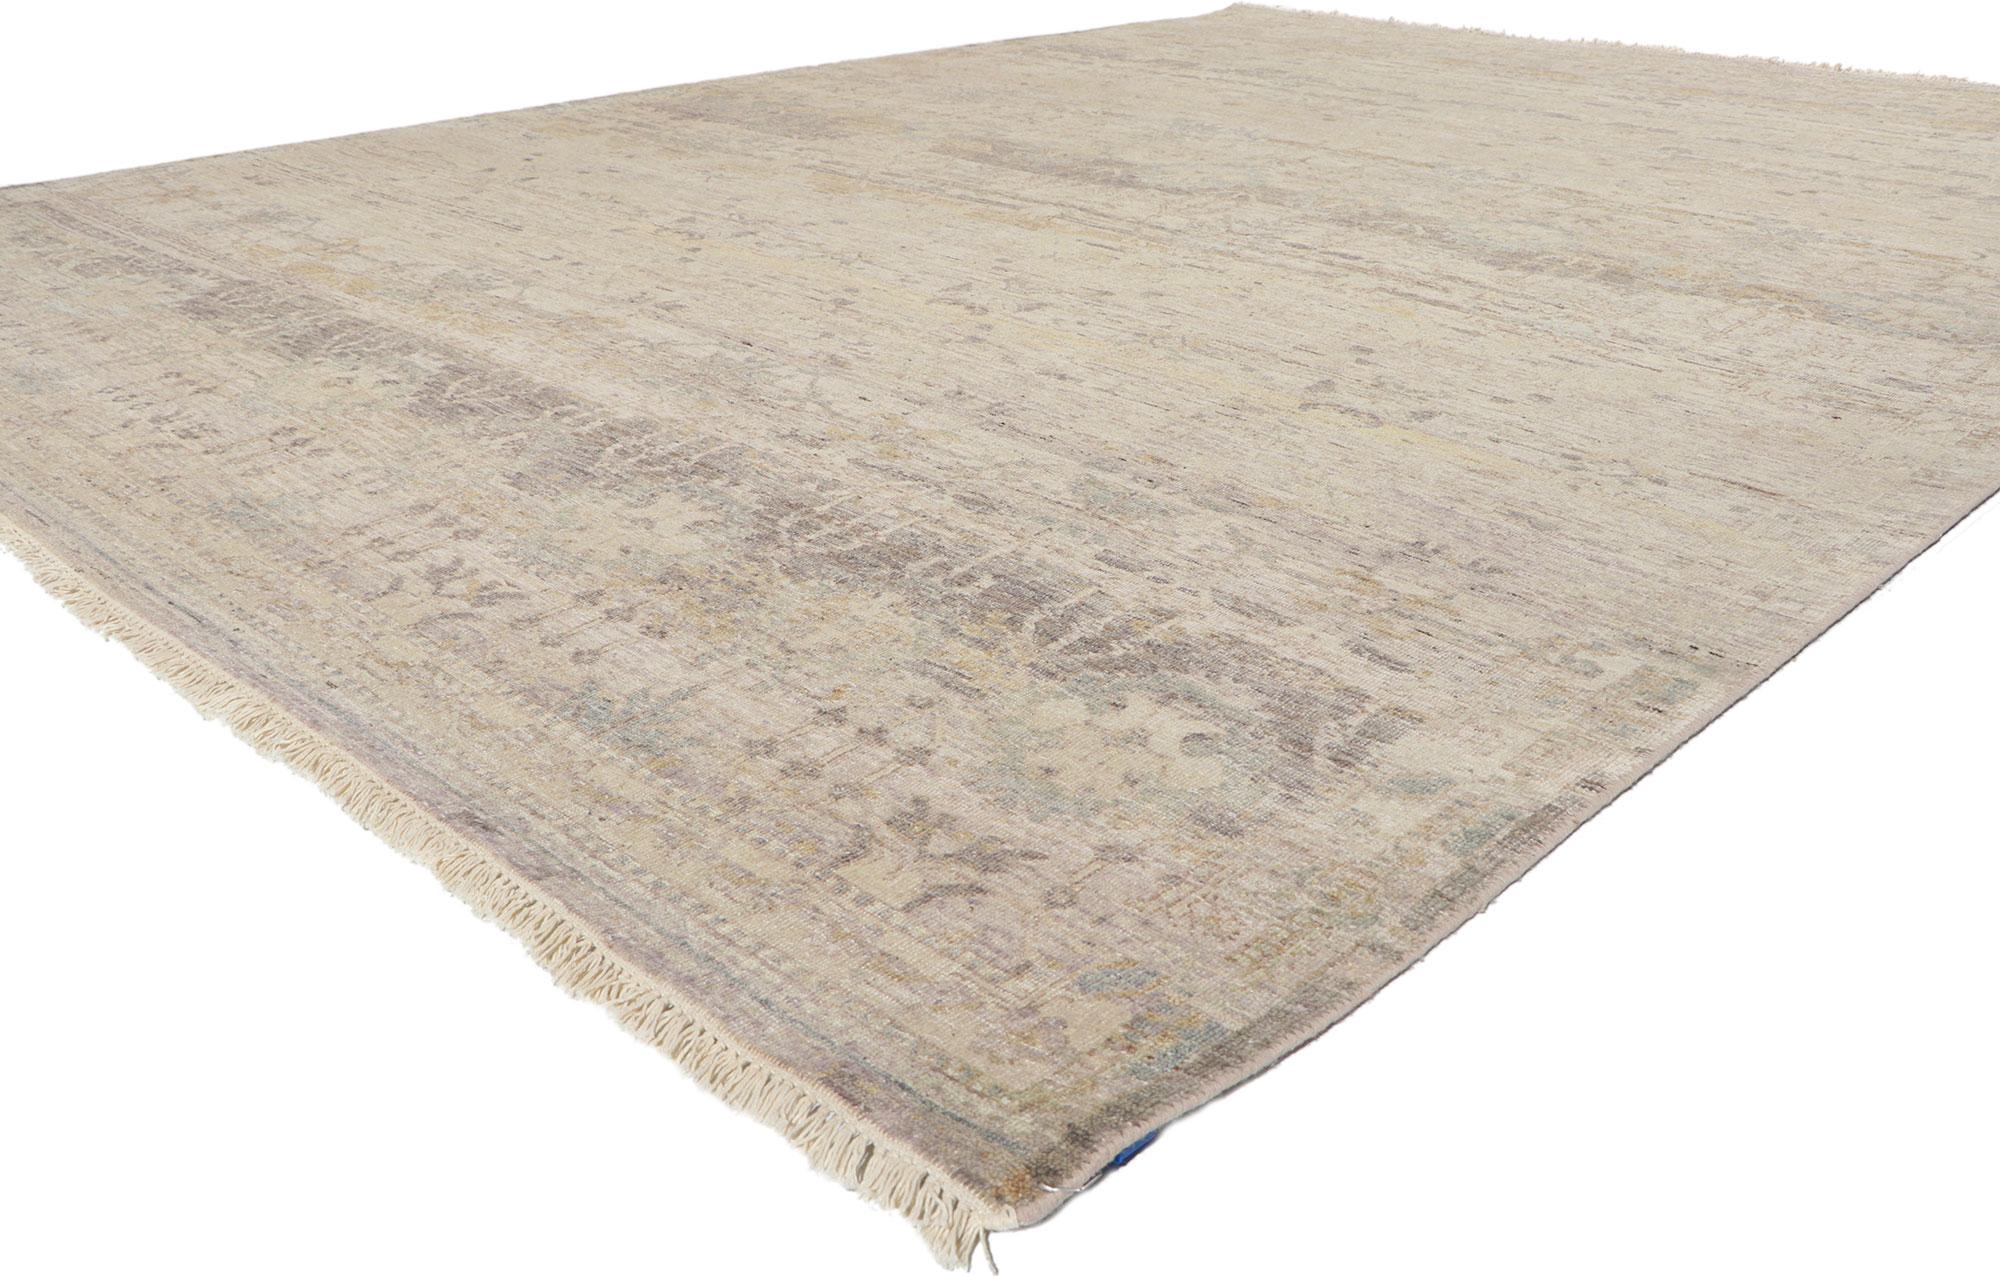 30781 New Modern distressed rug with vintage style 08'10 x 12'02. With its weathered beauty and nostalgic charm, this new contemporary distressed rug creates an inimitable warmth and calming ambiance. The botanical design and soft colors woven into